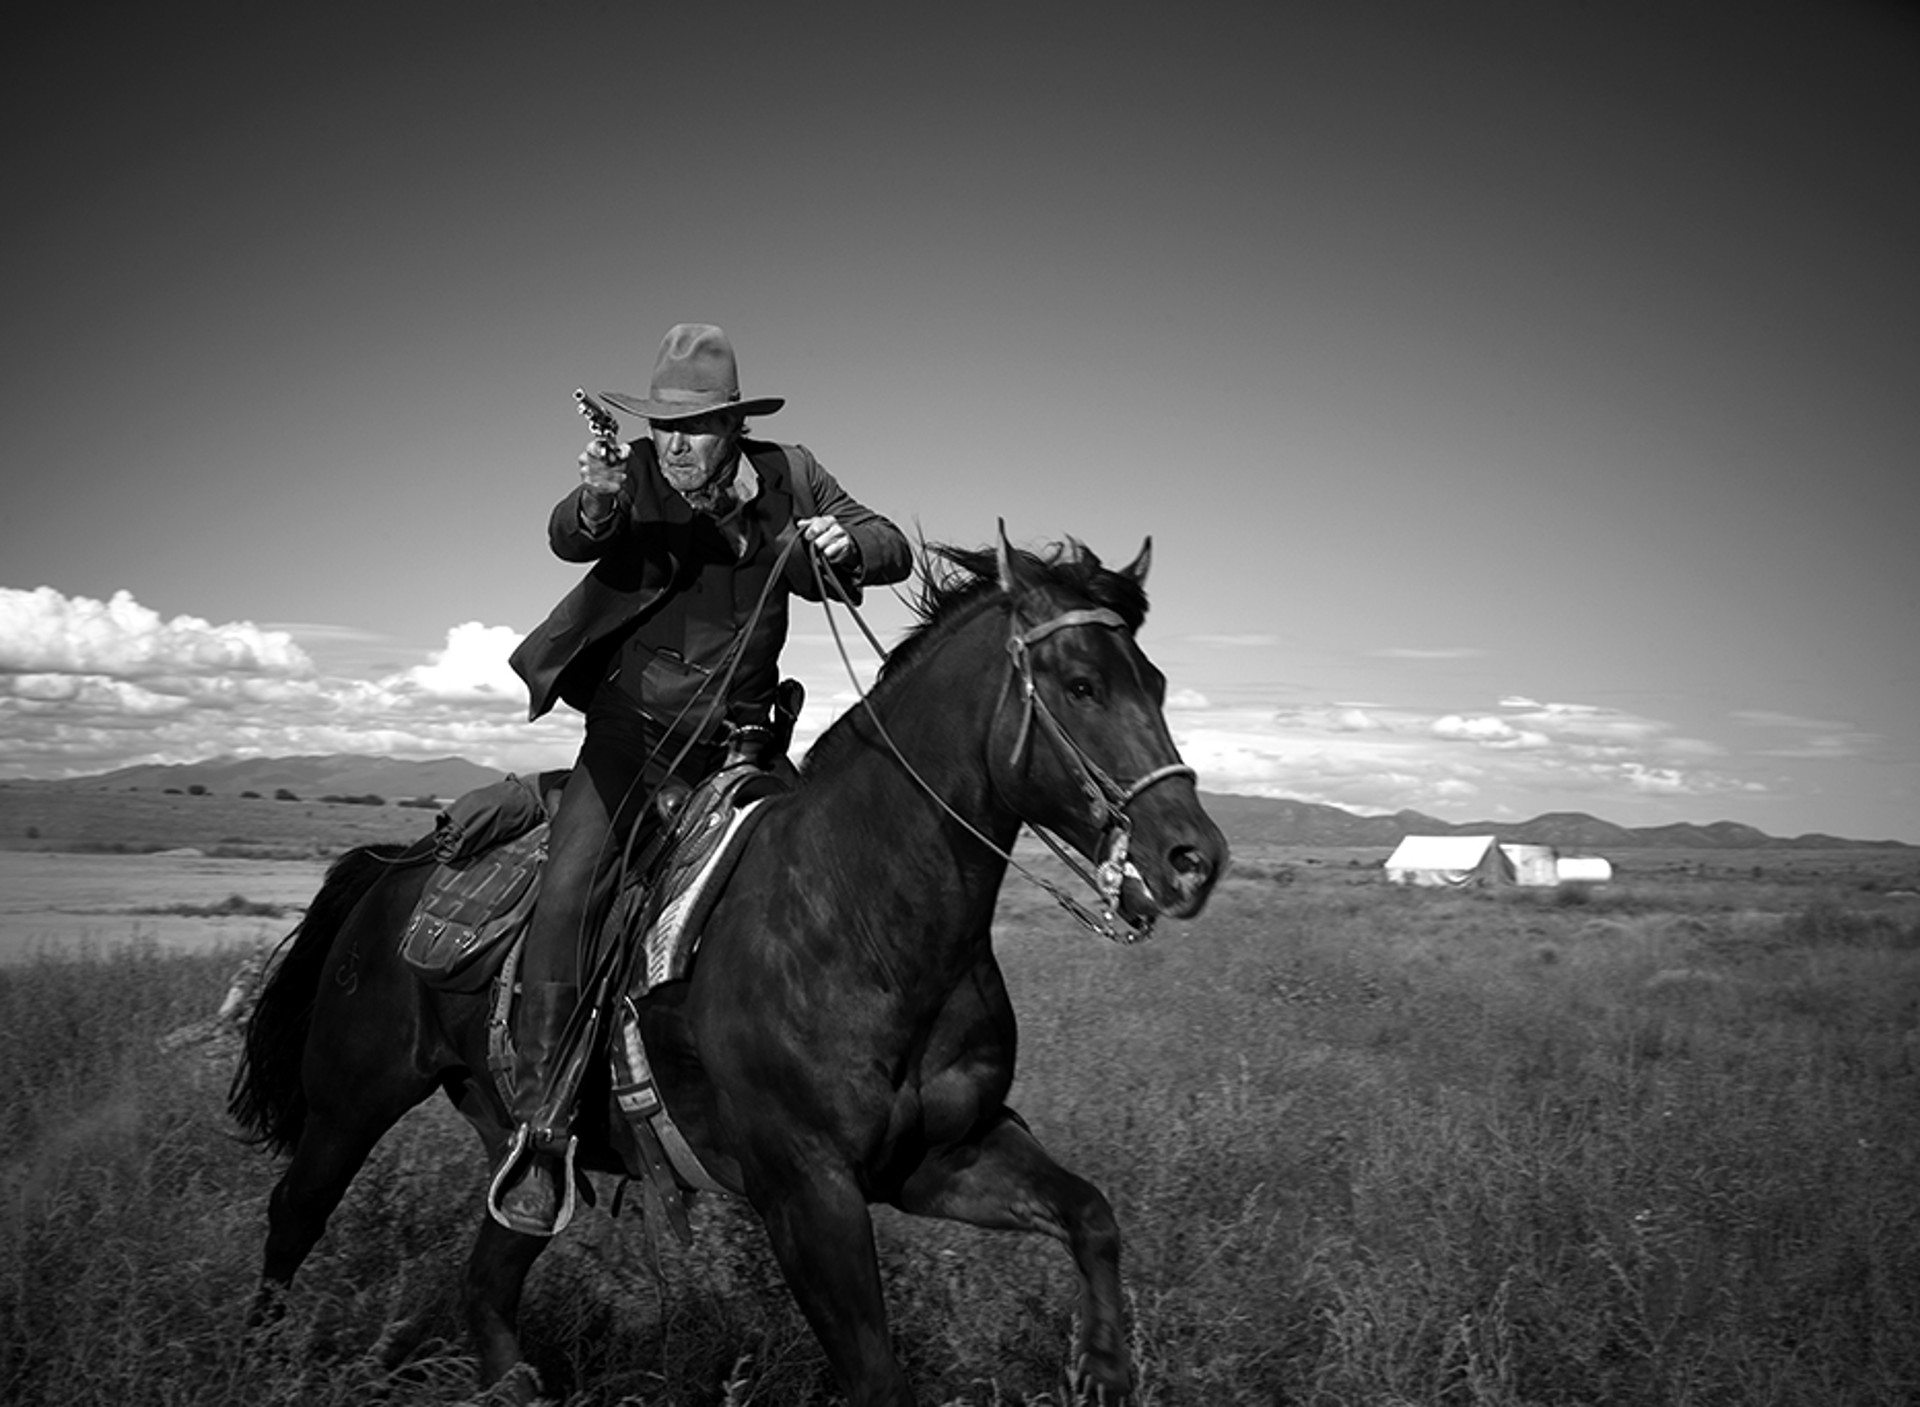 10018 Harrison Ford Riding the Horse BW by Timothy White